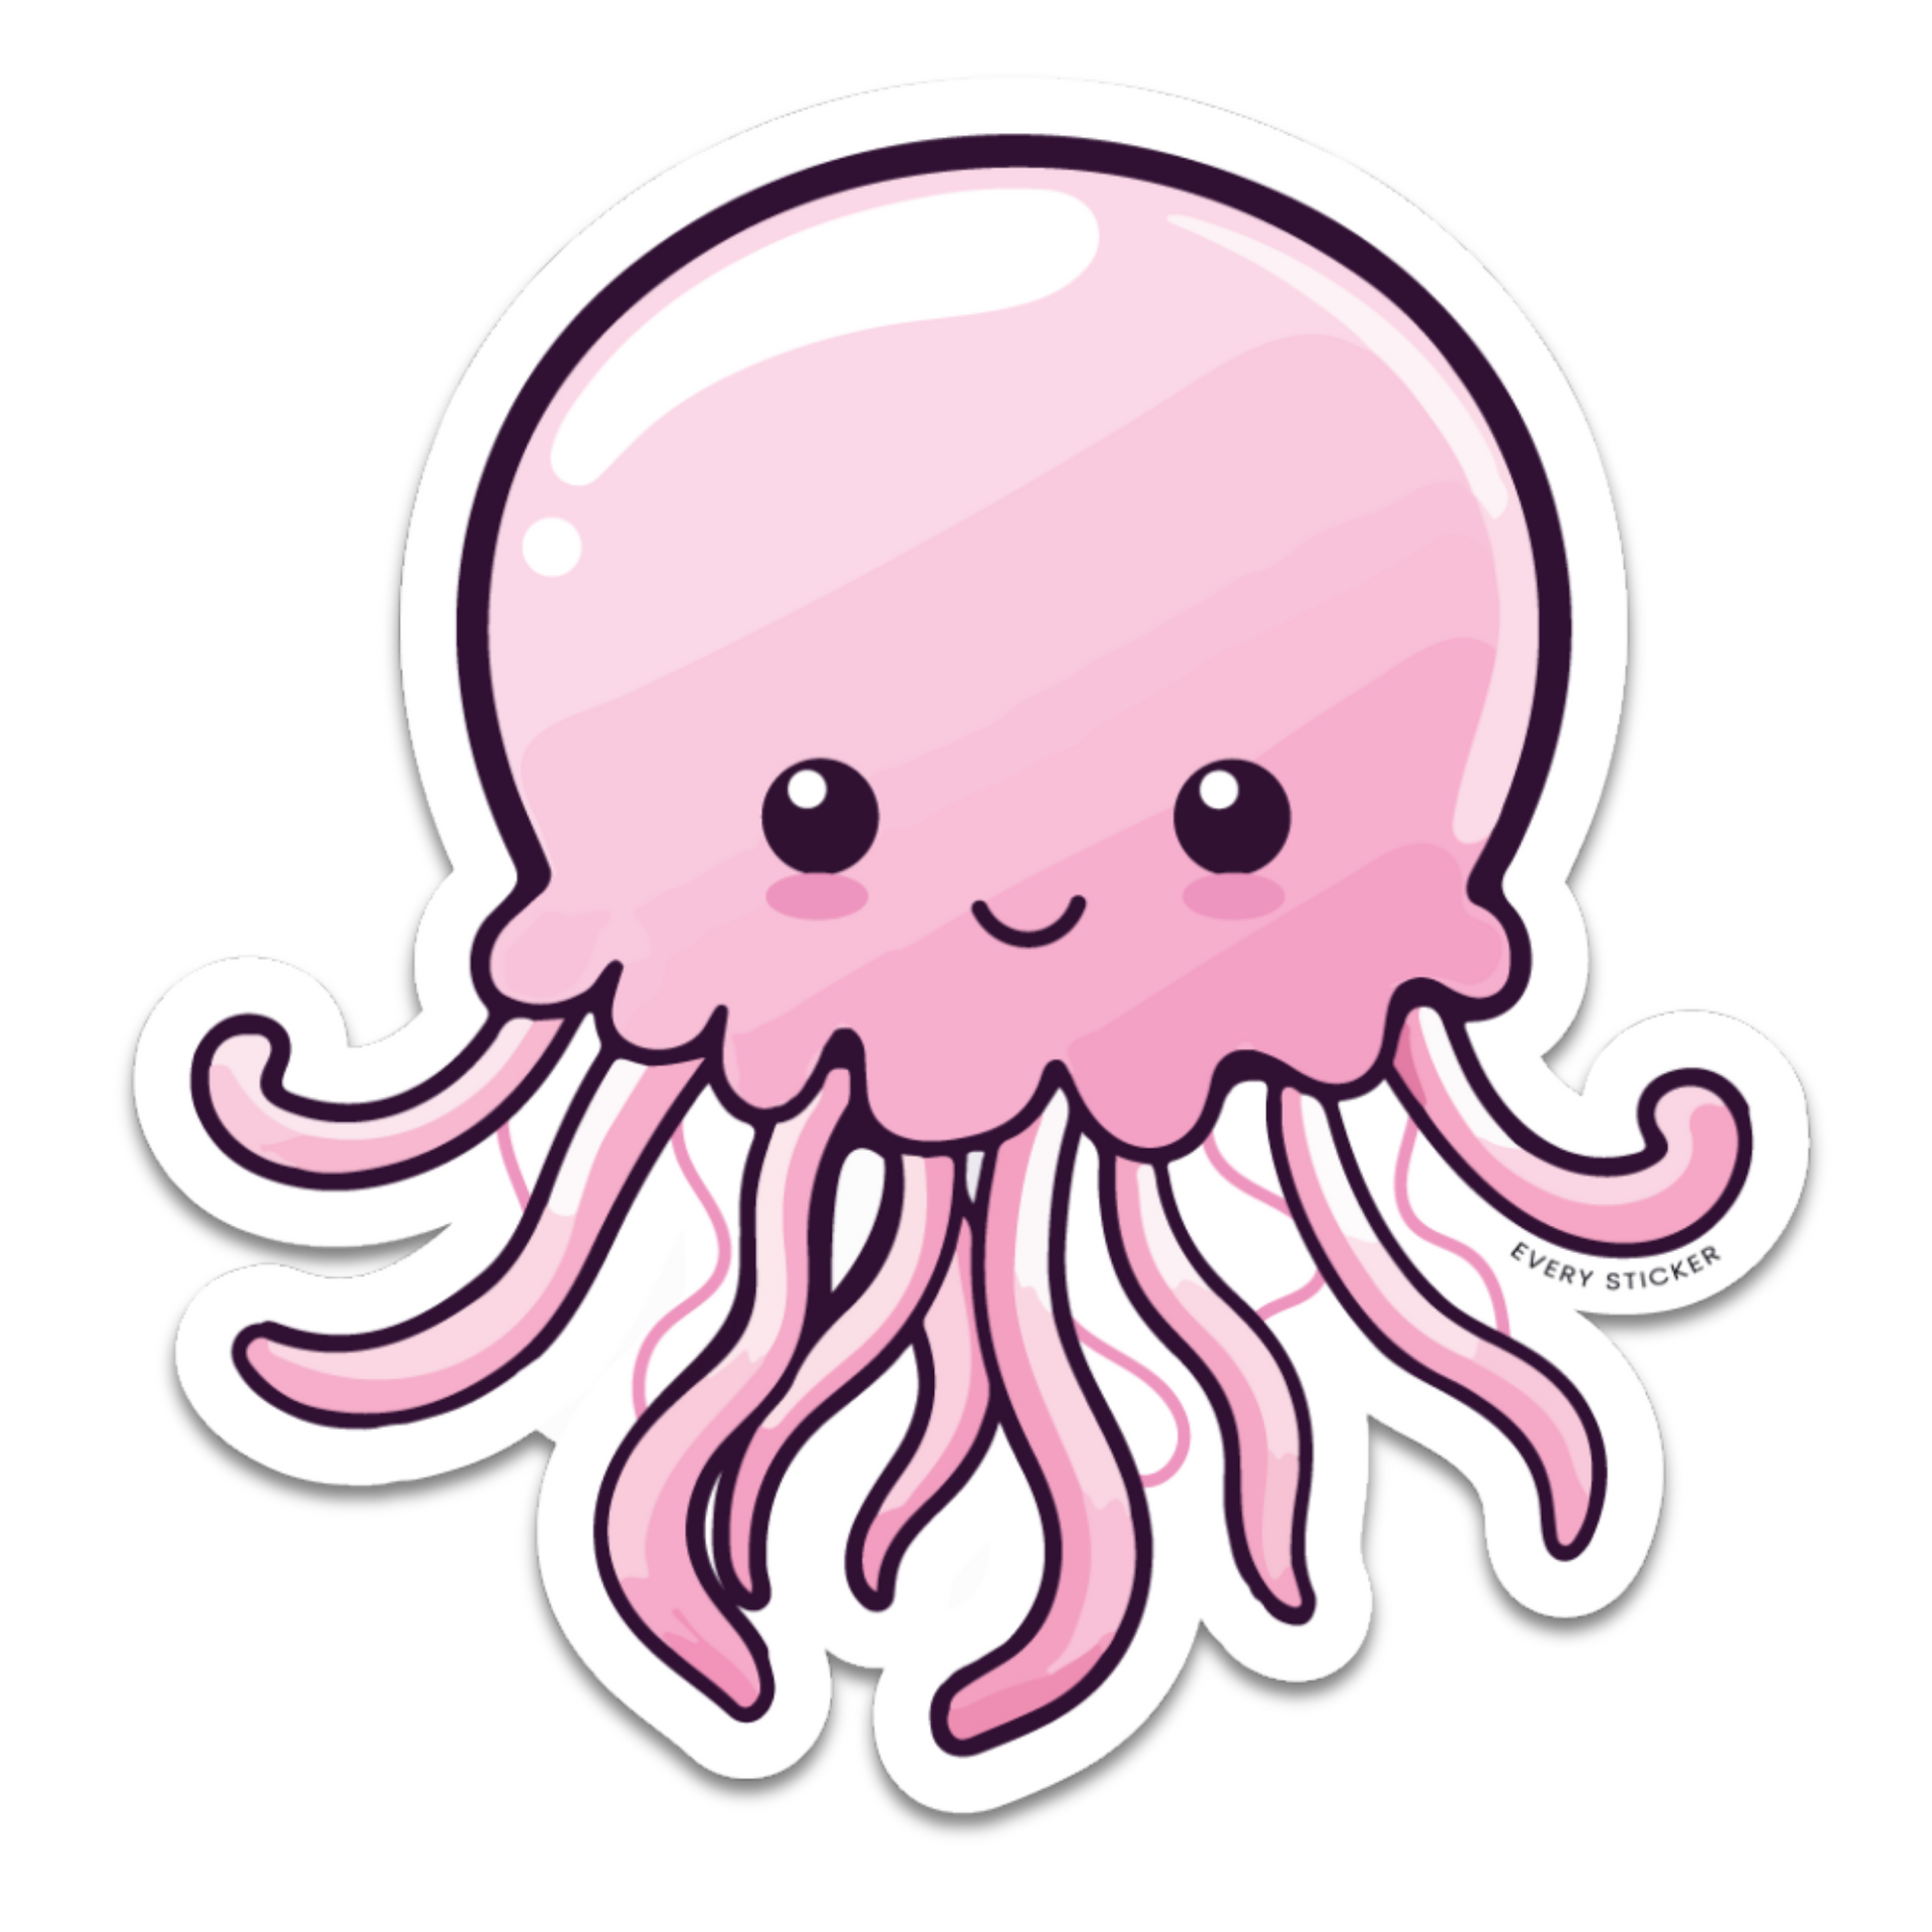 Pink jellyfish sticker, adorable expression, adorable jelly fish sticker, cute smile and rosy cheeks